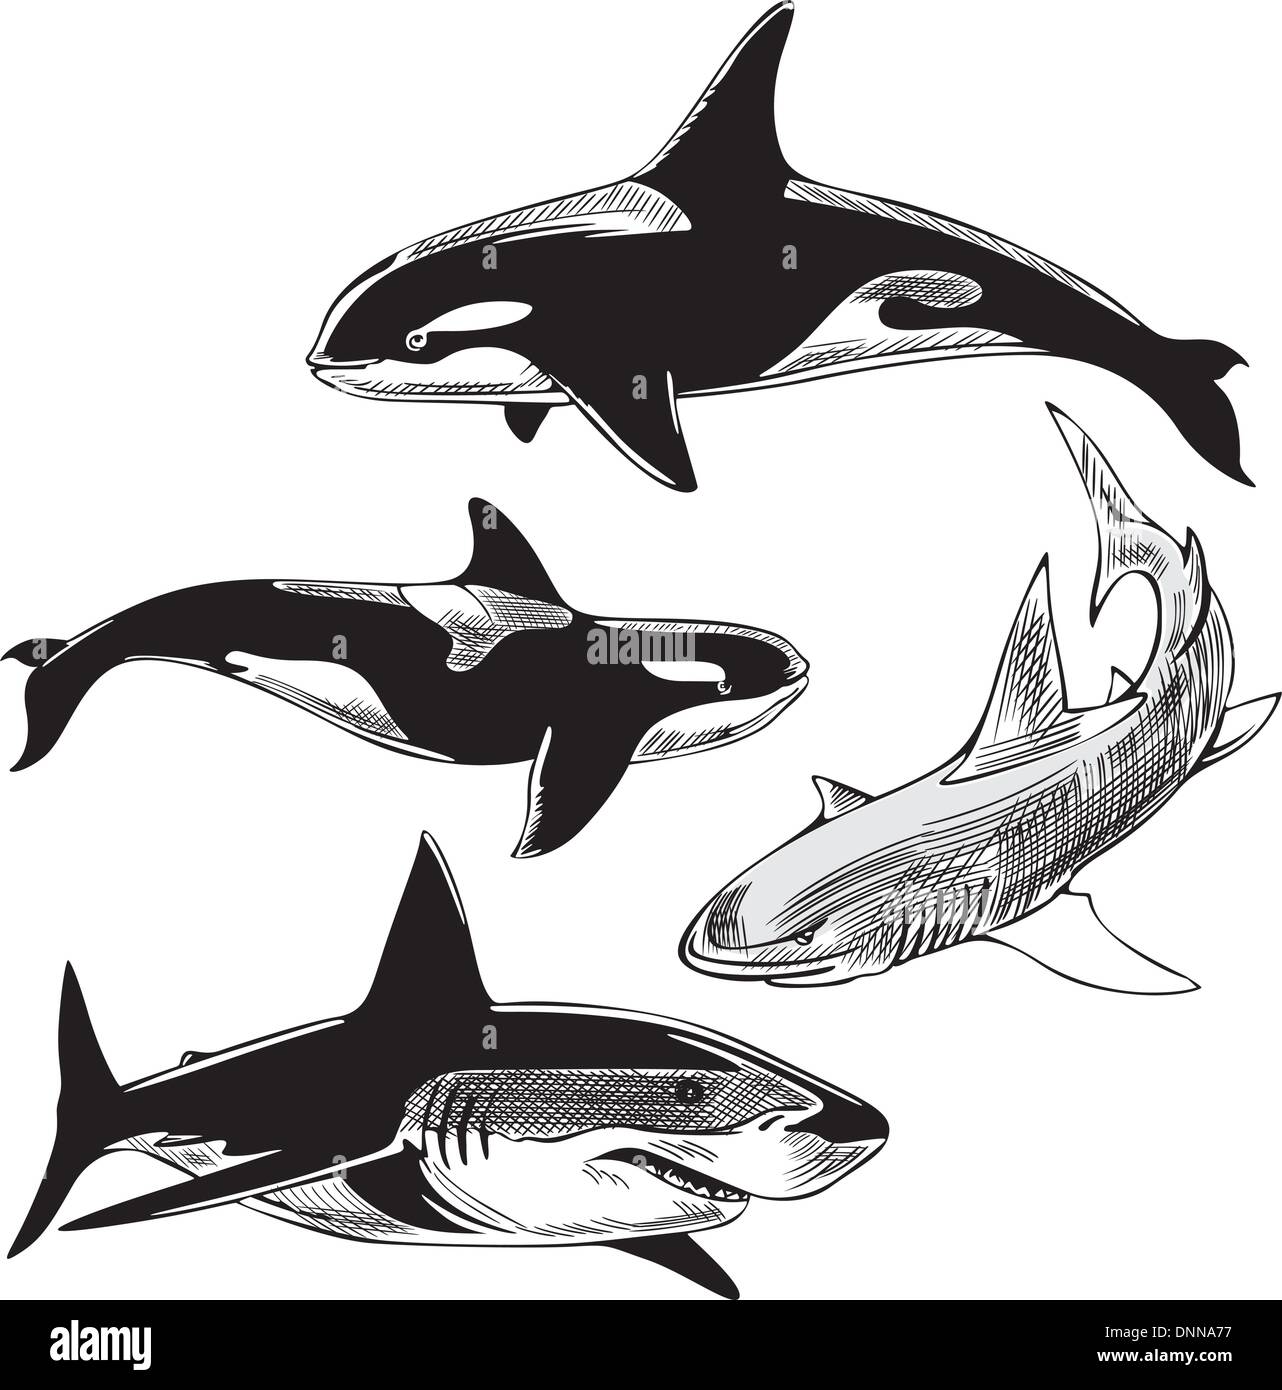 Sharks and killer whales. Set of black and white vector illustrations. Stock Vector